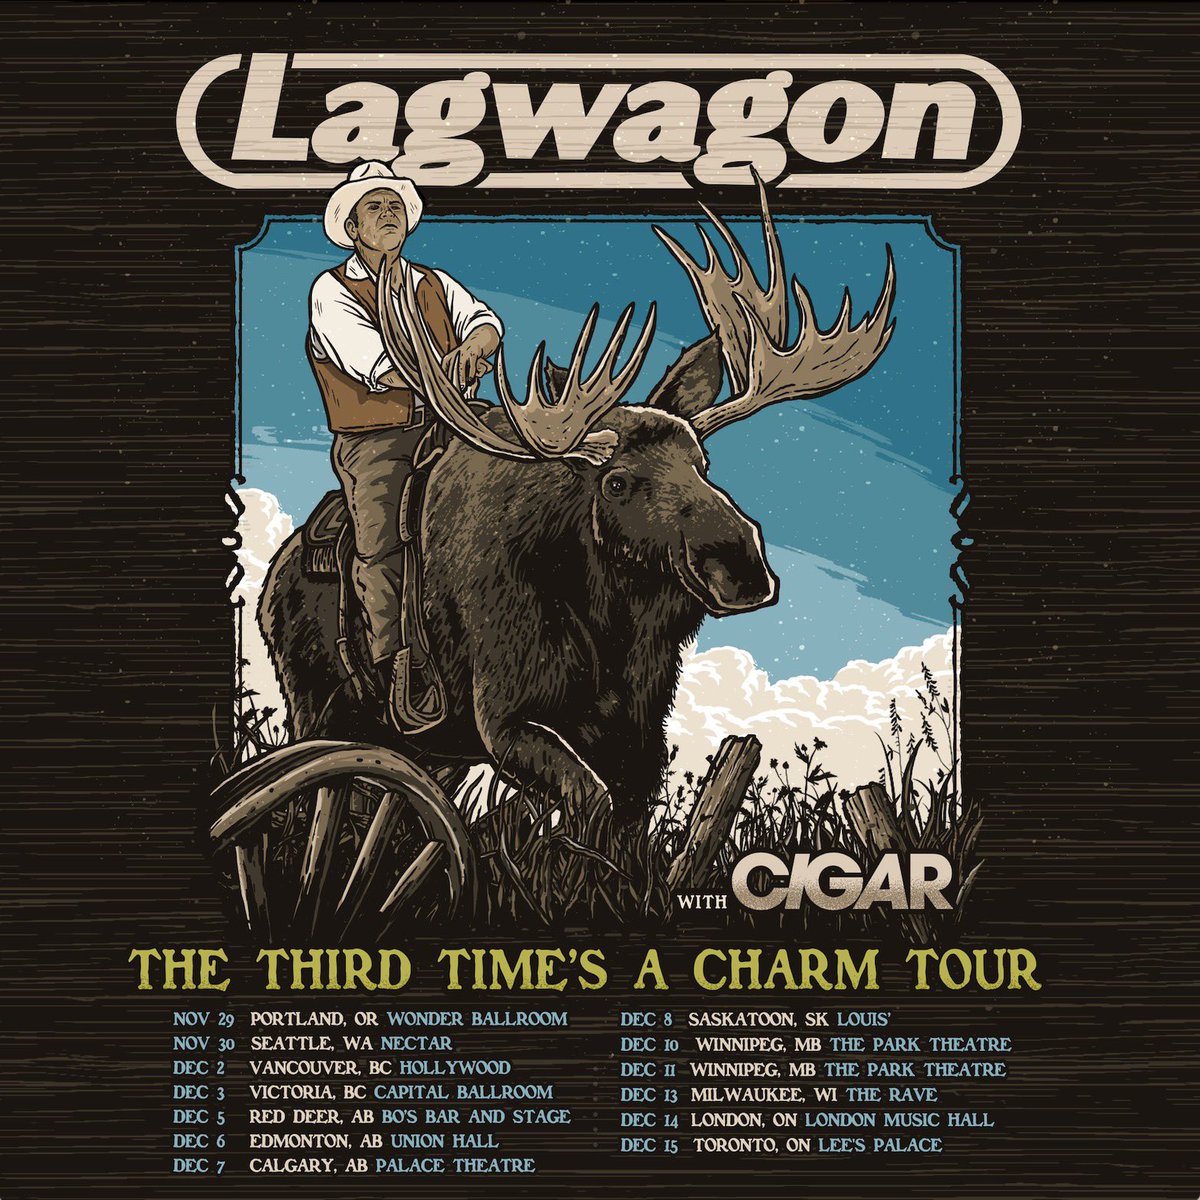 🚨PORTLAND - SEATTLE - MILWAUKEE SHOWS ANNOUNCED!🚨 We've added these cities to our tour this winter! Super stoked that our friends #CIGAR will be joining us for the whole run . 💪🏽🎸🎉 Tickets go on sale Friday 10/6 at 10 am local time: lagwagon.com/tour Spread the word!